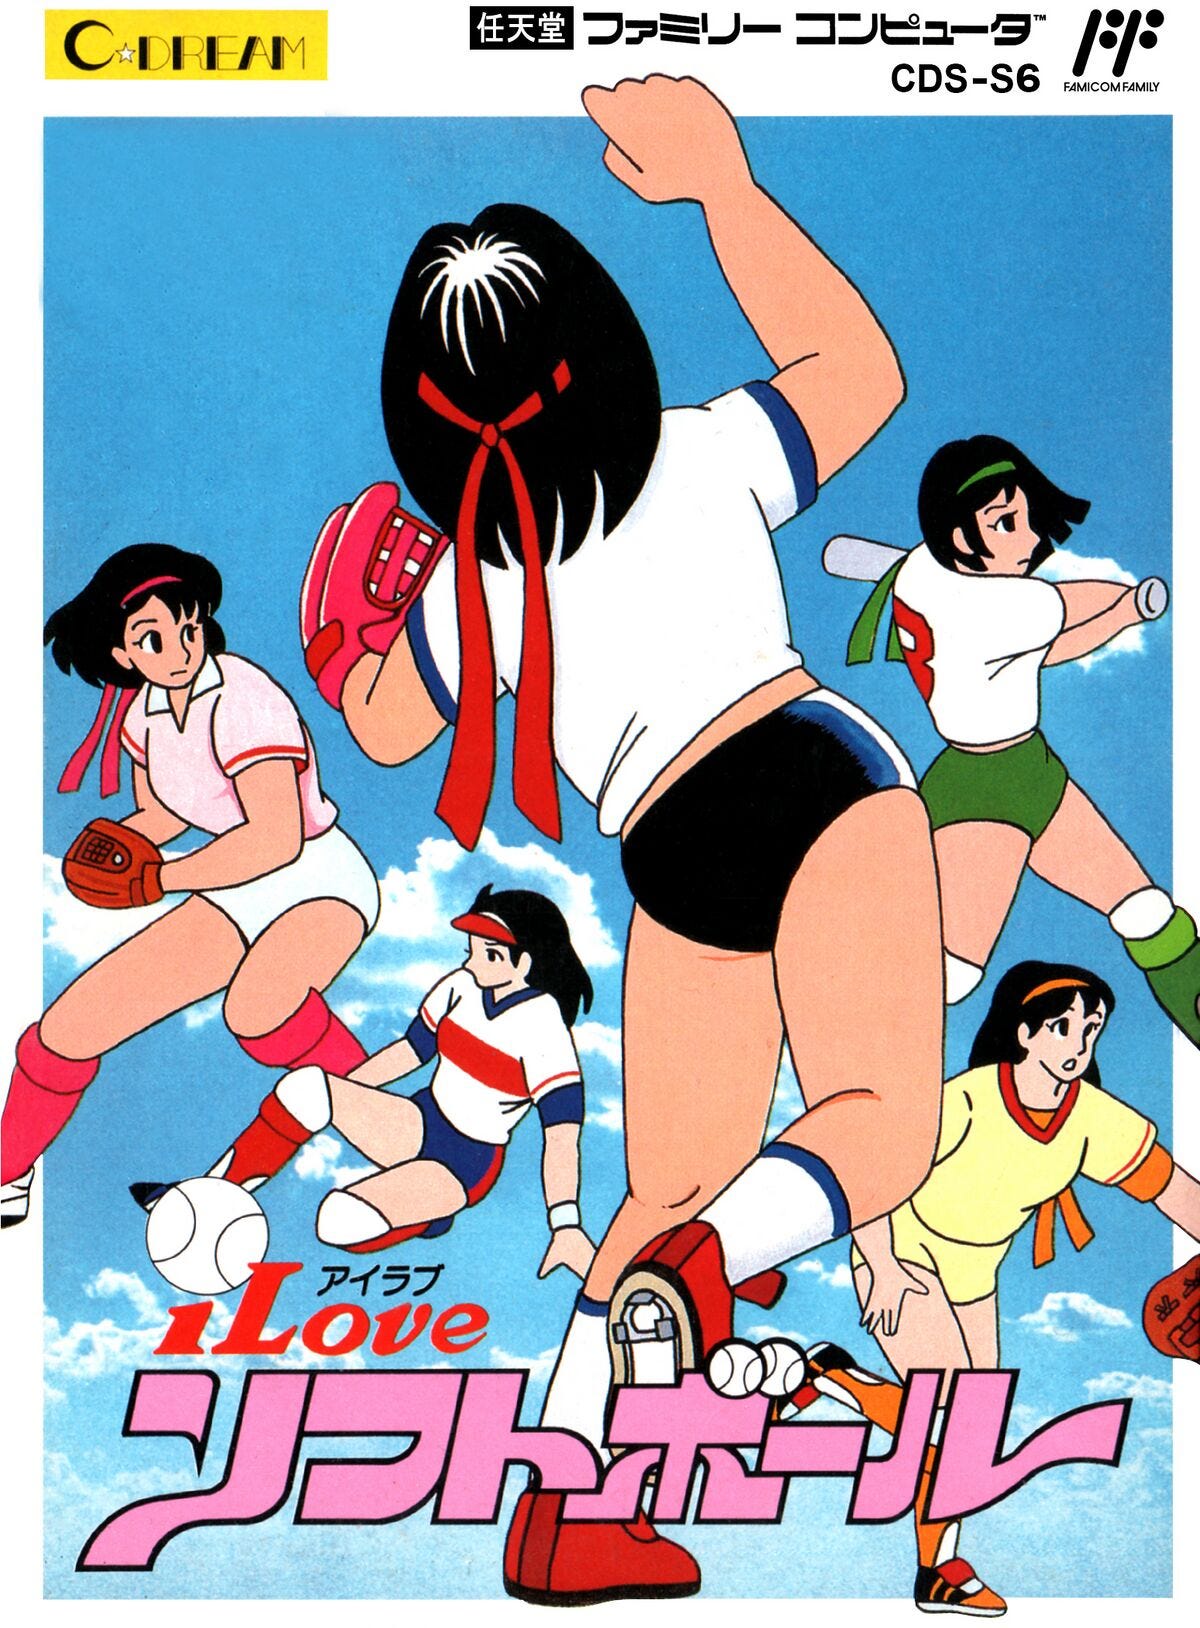 The Famicom box art for I Love Softball, featuring a bunch of softball players in various poses, such as catching a ball, preparing to throw, sliding, and swinging a bat. They're all in shorts, more bandanas than visors on, and not a helmet to be seen.